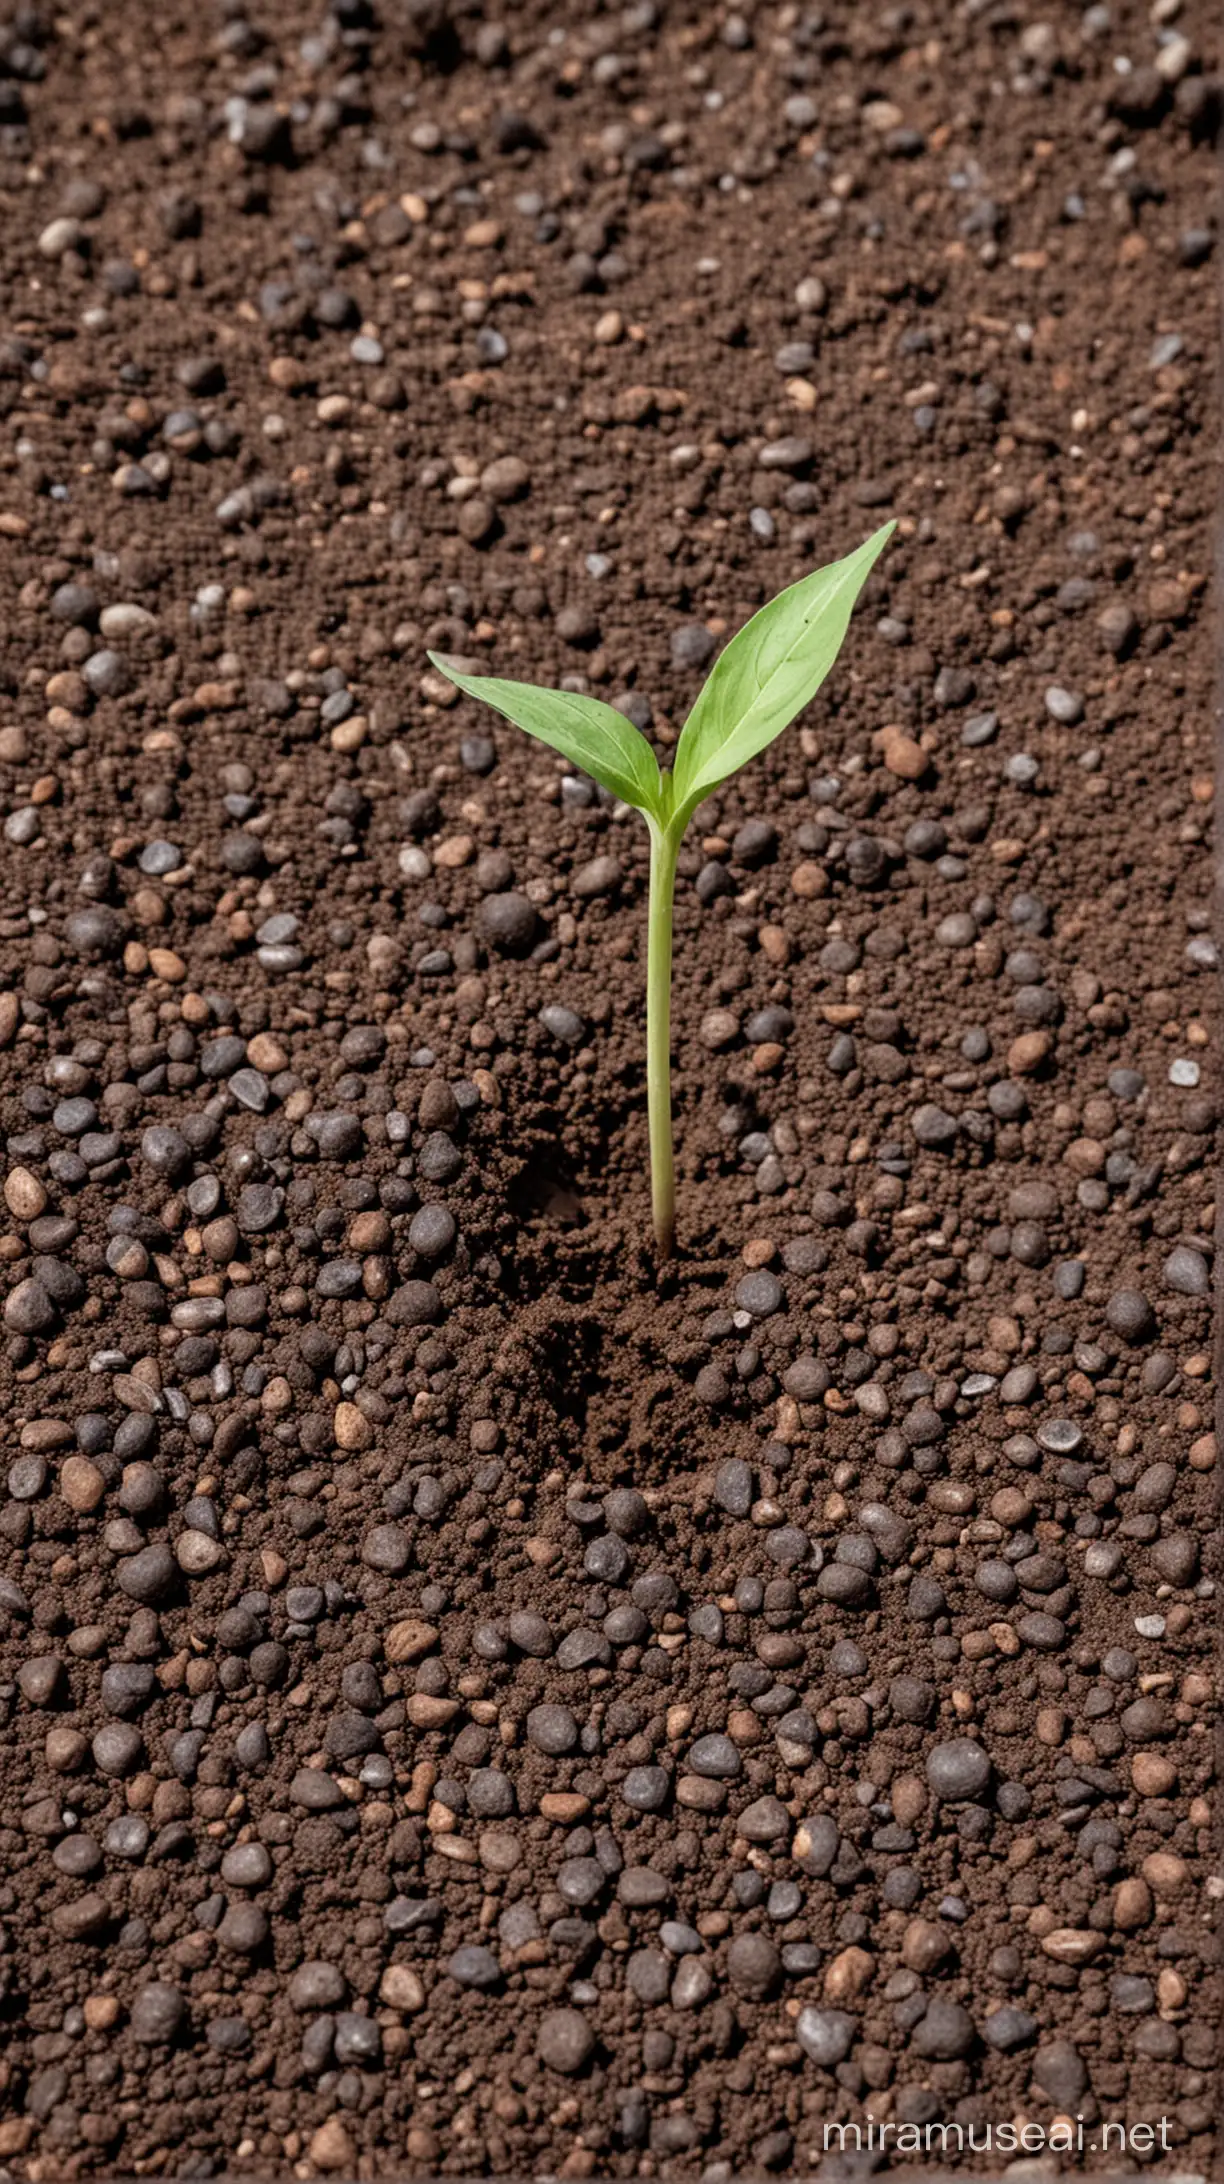 Lone Seed Growing in Rich Soil Symbolizing Growth and Potential